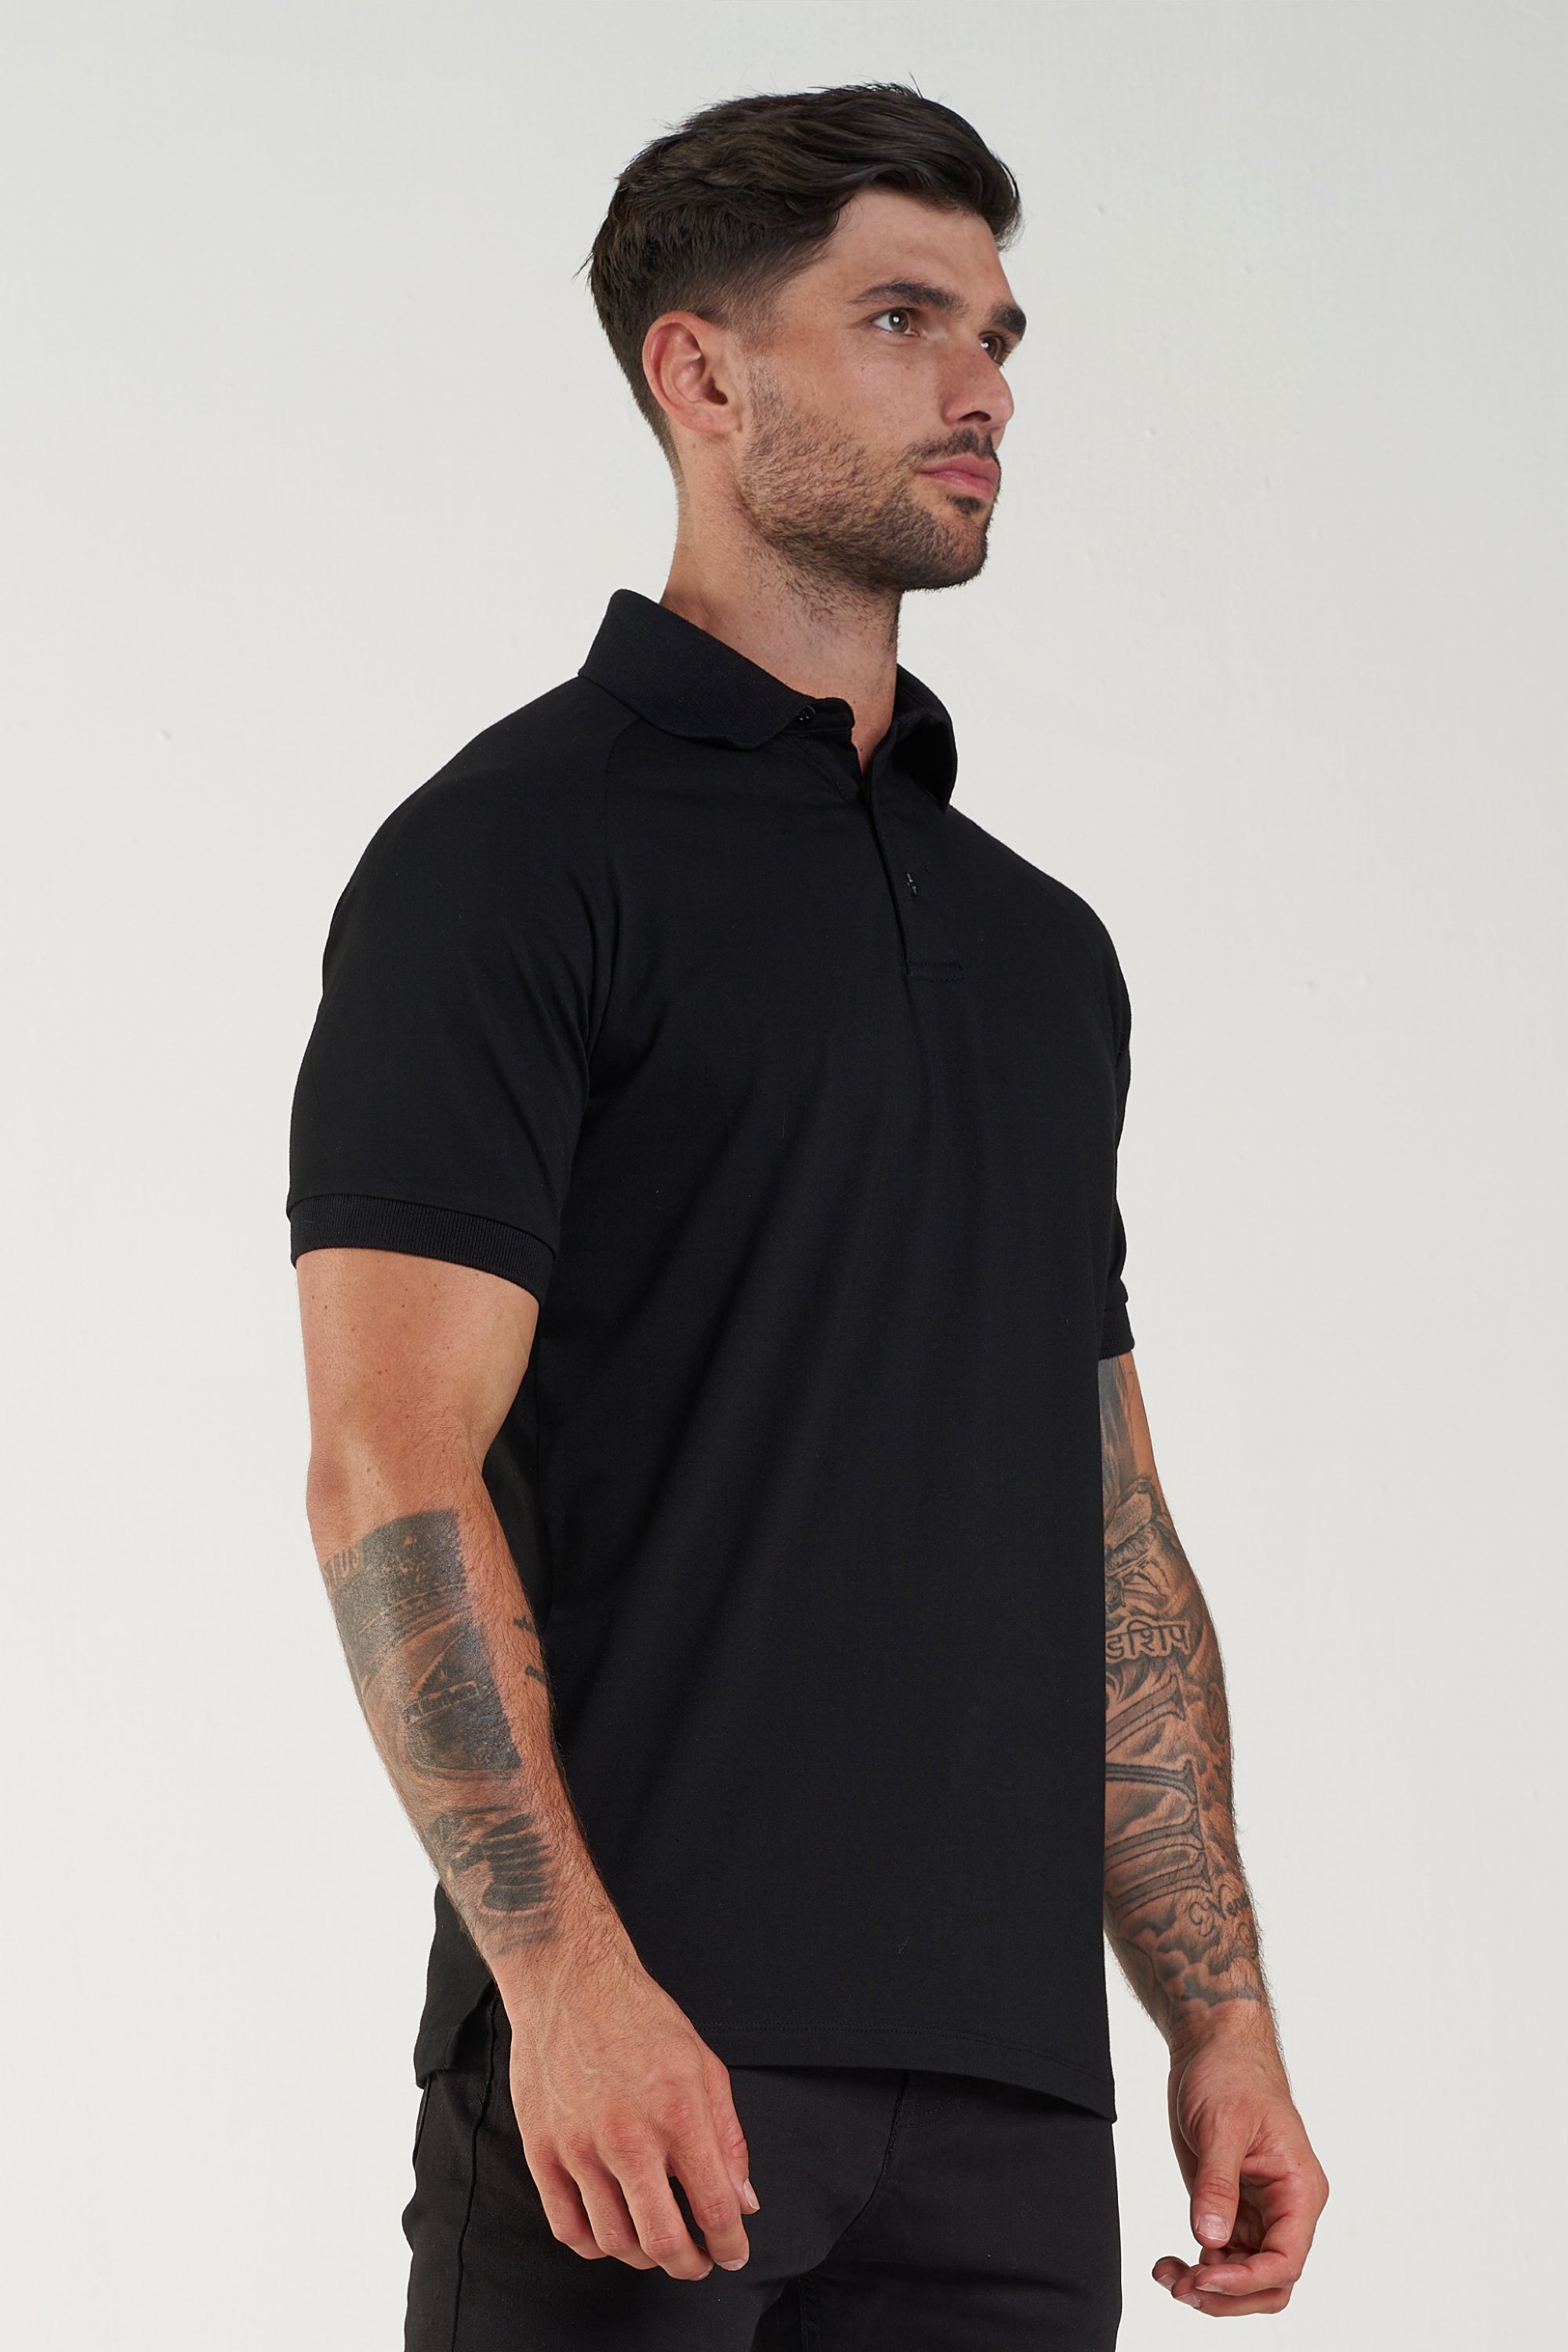 THE MUSCLE BUTTON POLO - BLACK - ICON. AMSTERDAM